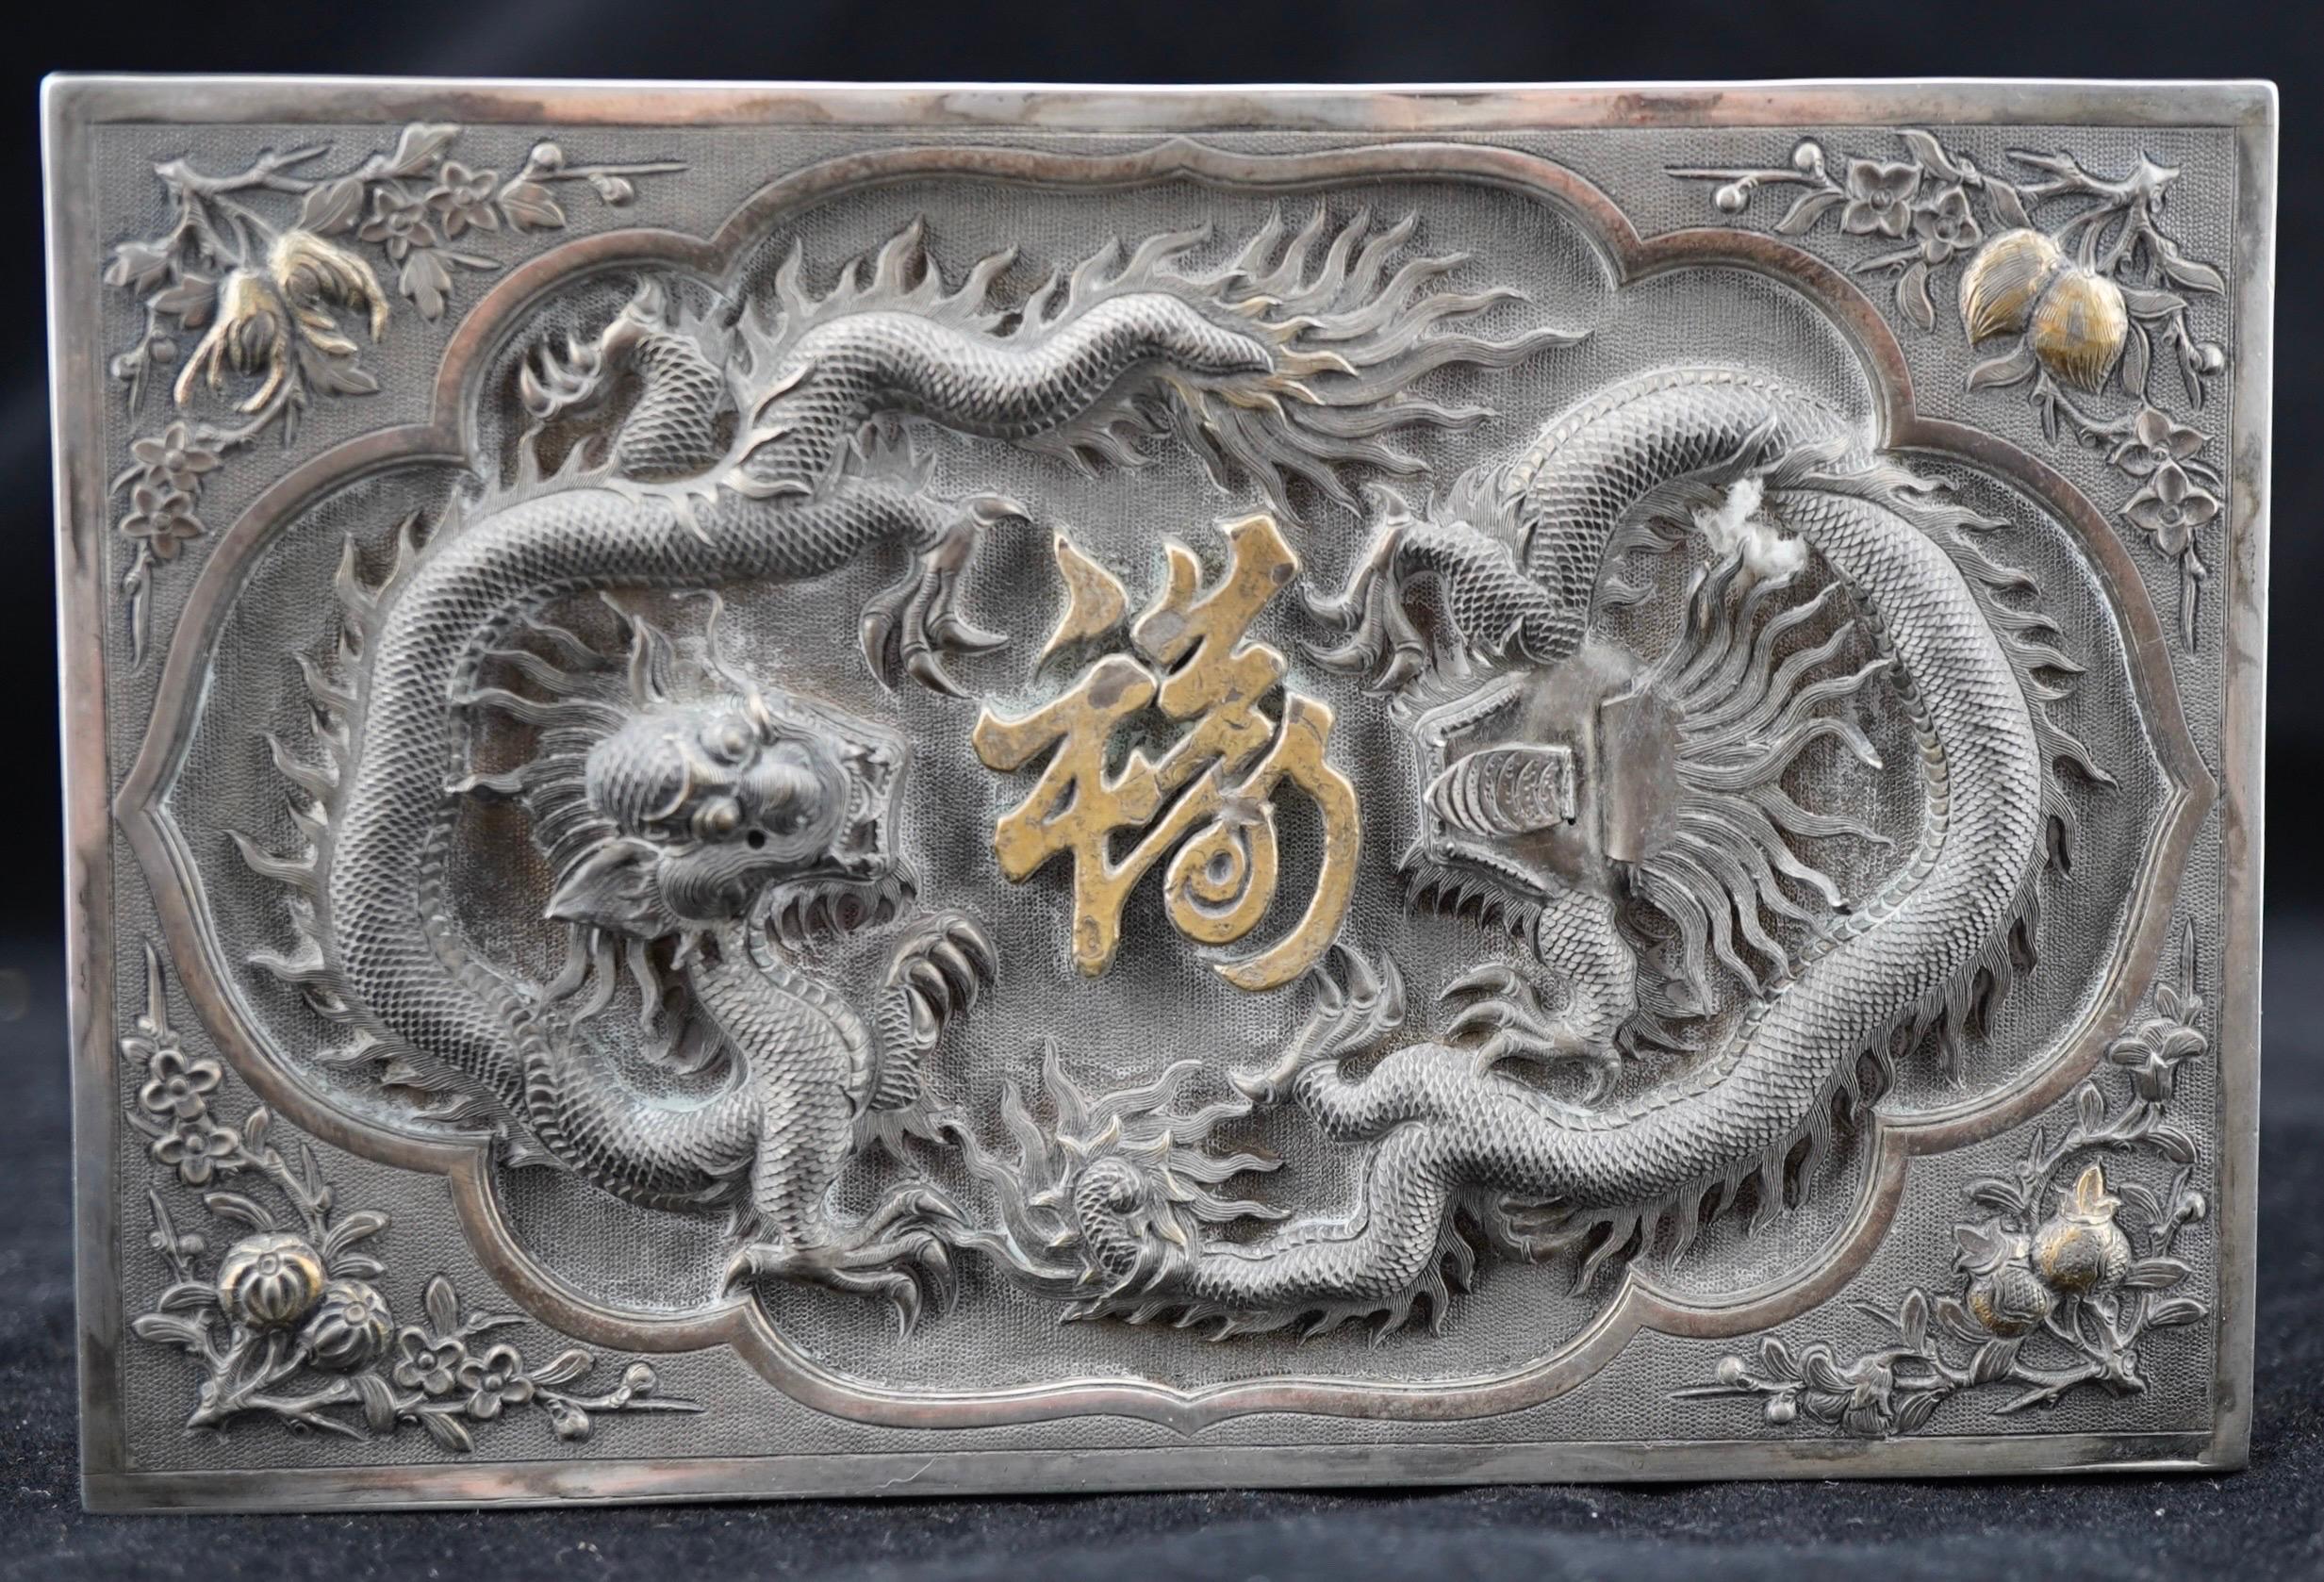 Chinese silver box with repousse, chasing and cast applied dragons. Very fine period work. Marked with French import hallmarks.